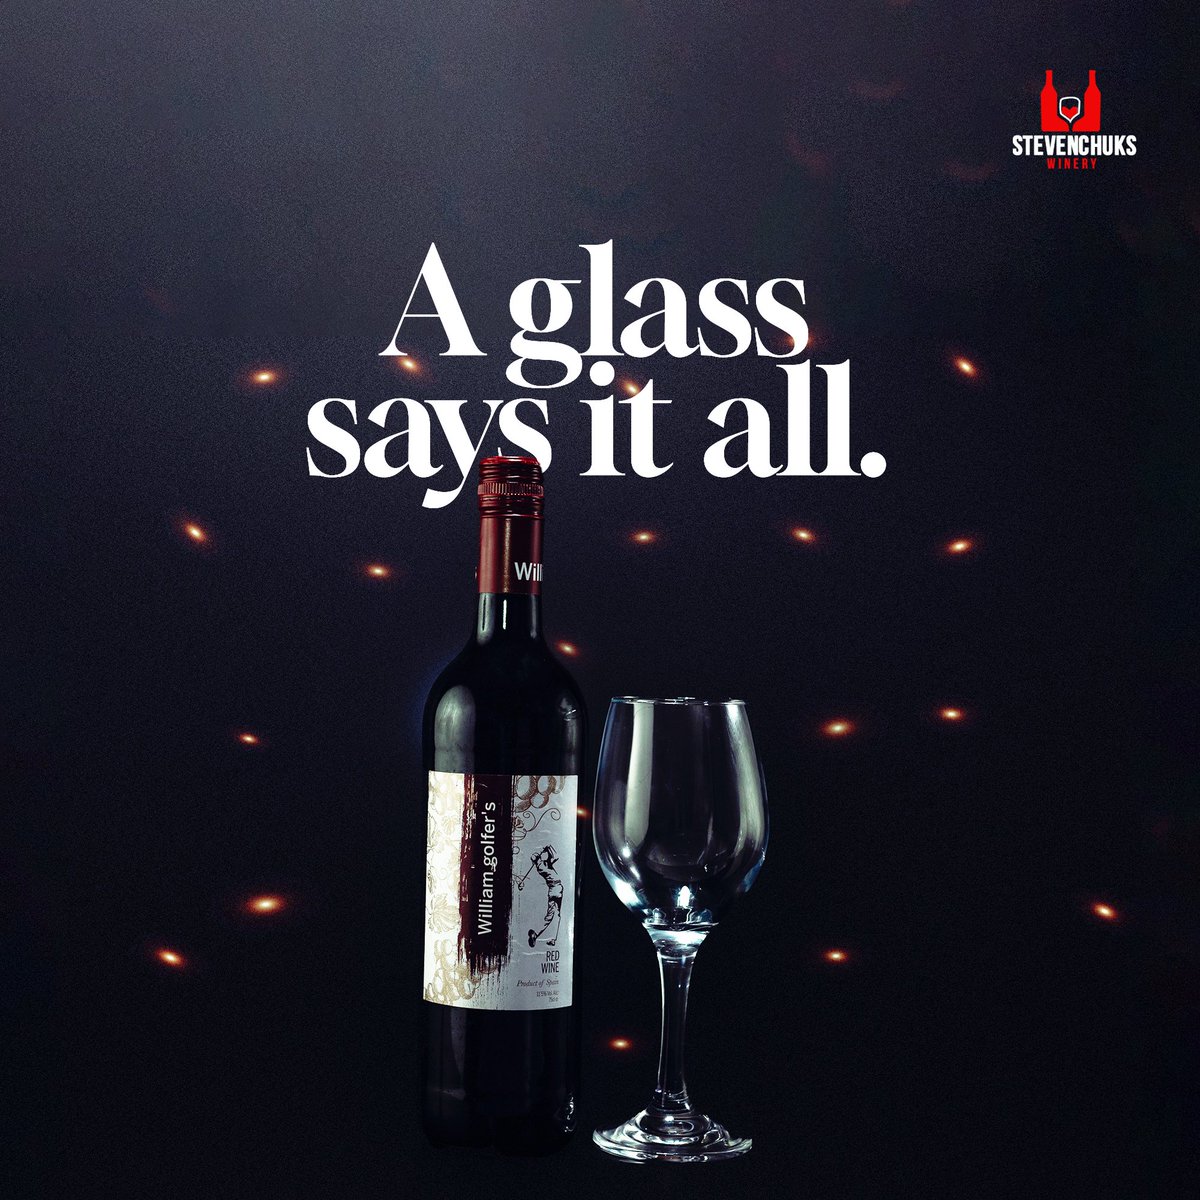 A glass of Williams Golfer Wine says it all - elegance, excellence, and a celebration of the finer things in life.

#Luxury #WilliamGolfer #PremiumWine #Wine #DrinkResponsibly #StevenChuksWinery